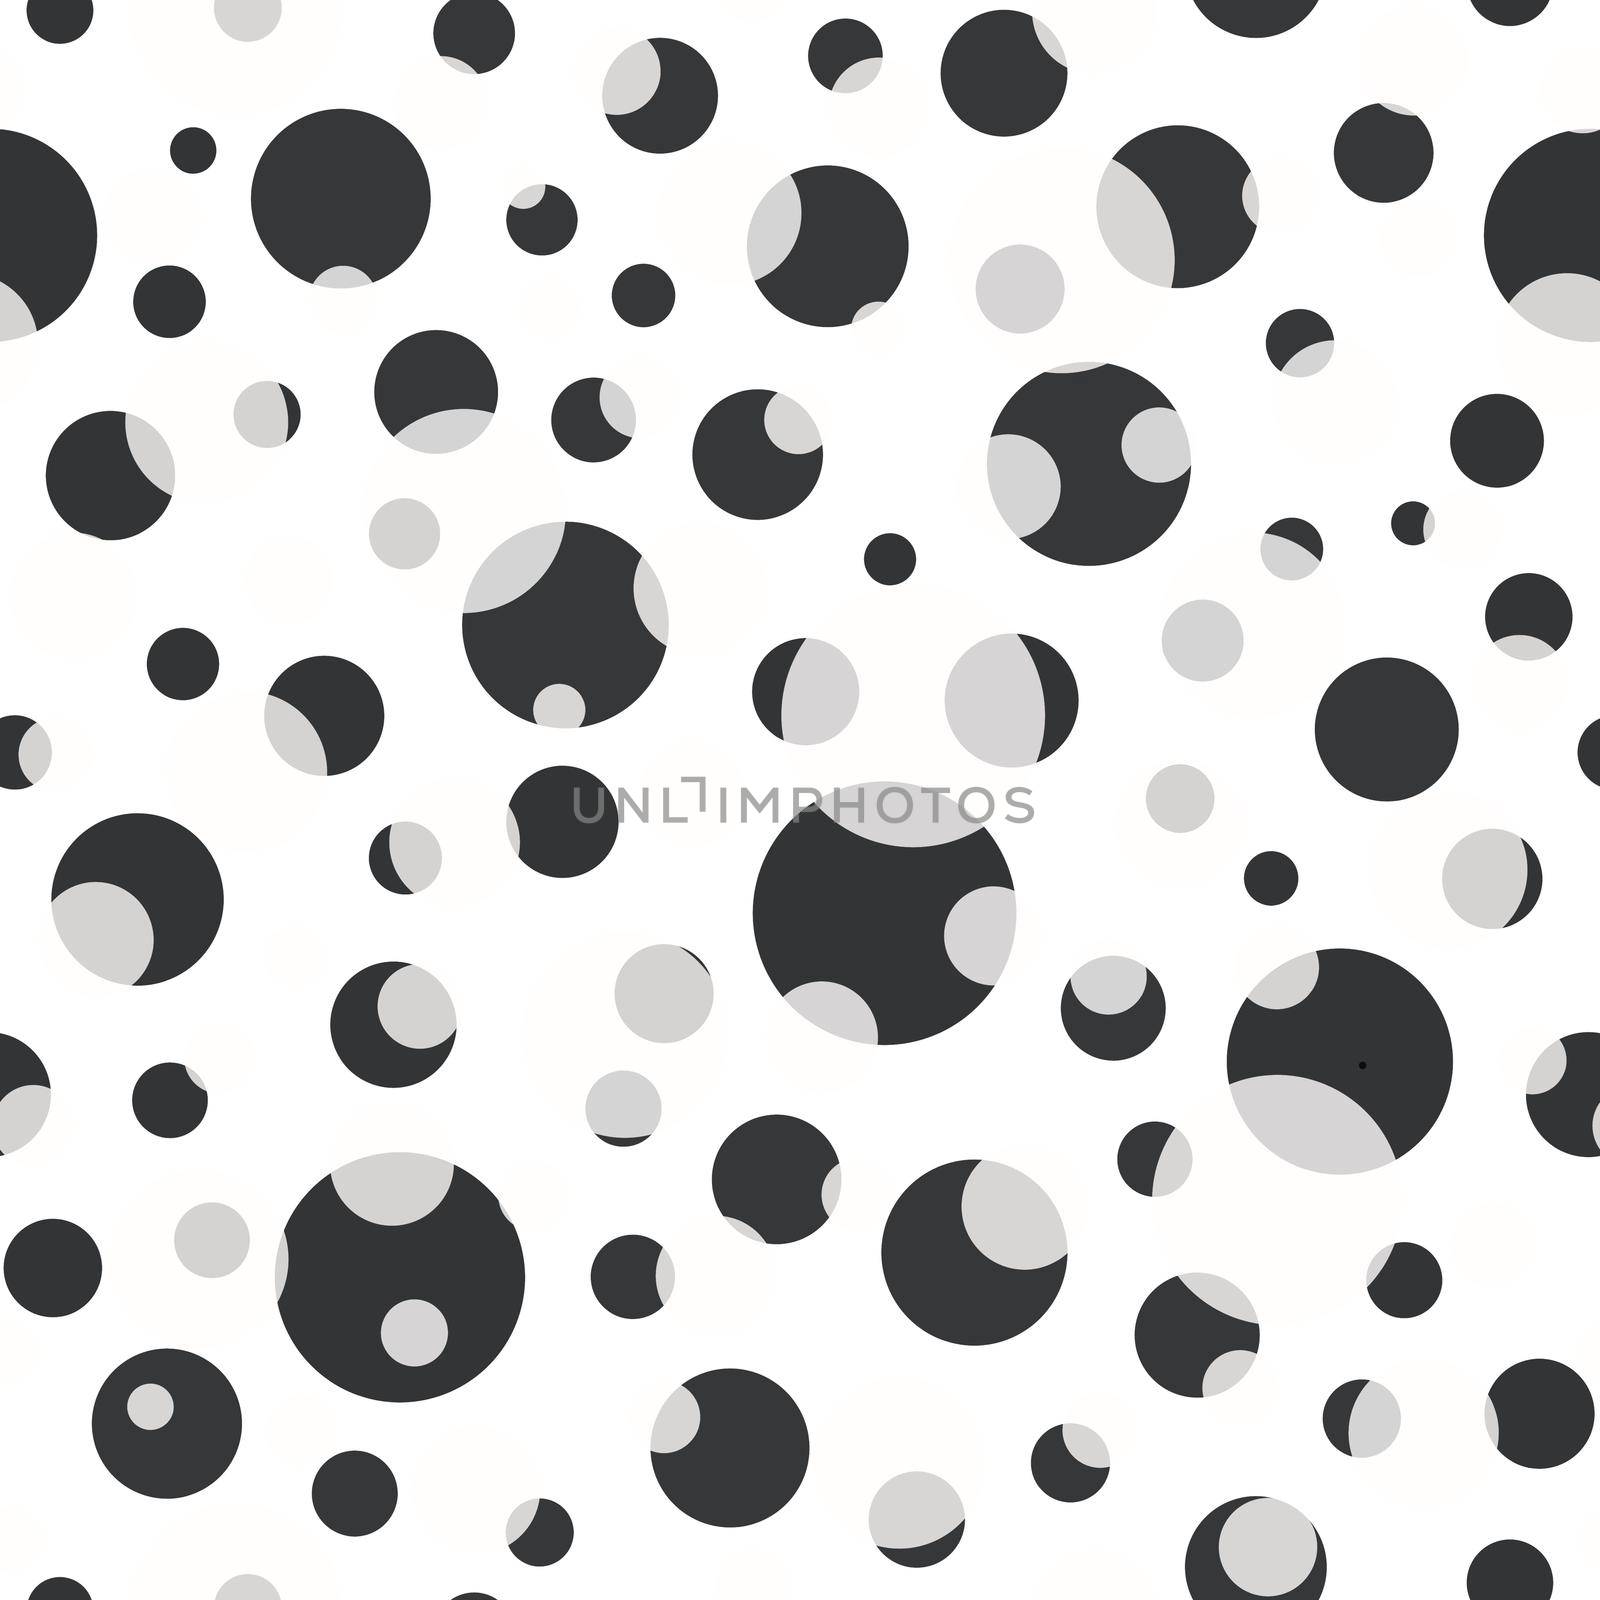 Abstract seamless pattern with monochrome balls.Illustration of overlapping dots pattern for background abstract.Polka dots ornament.Good for invitation,poster,card,flyer,banner,textile,fabric.